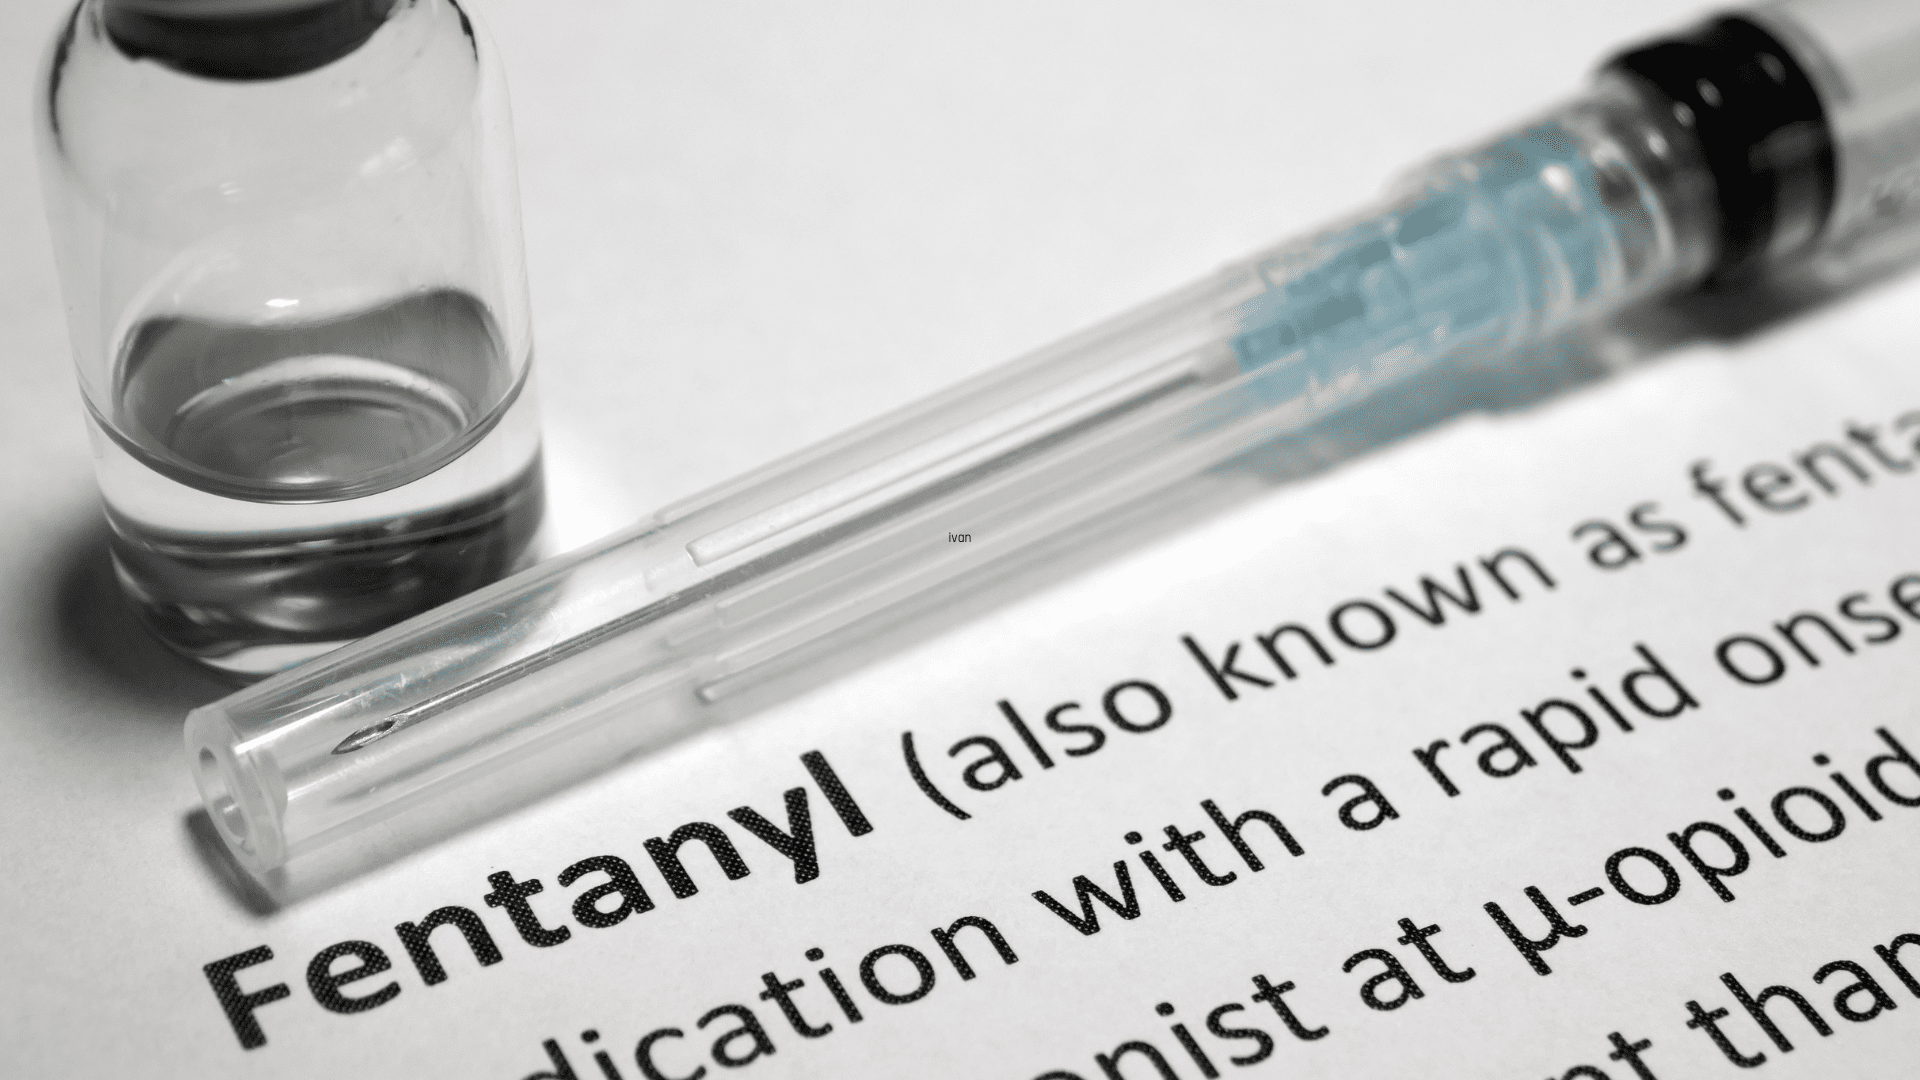 What Are Fentanyl Withdrawal Symptoms?